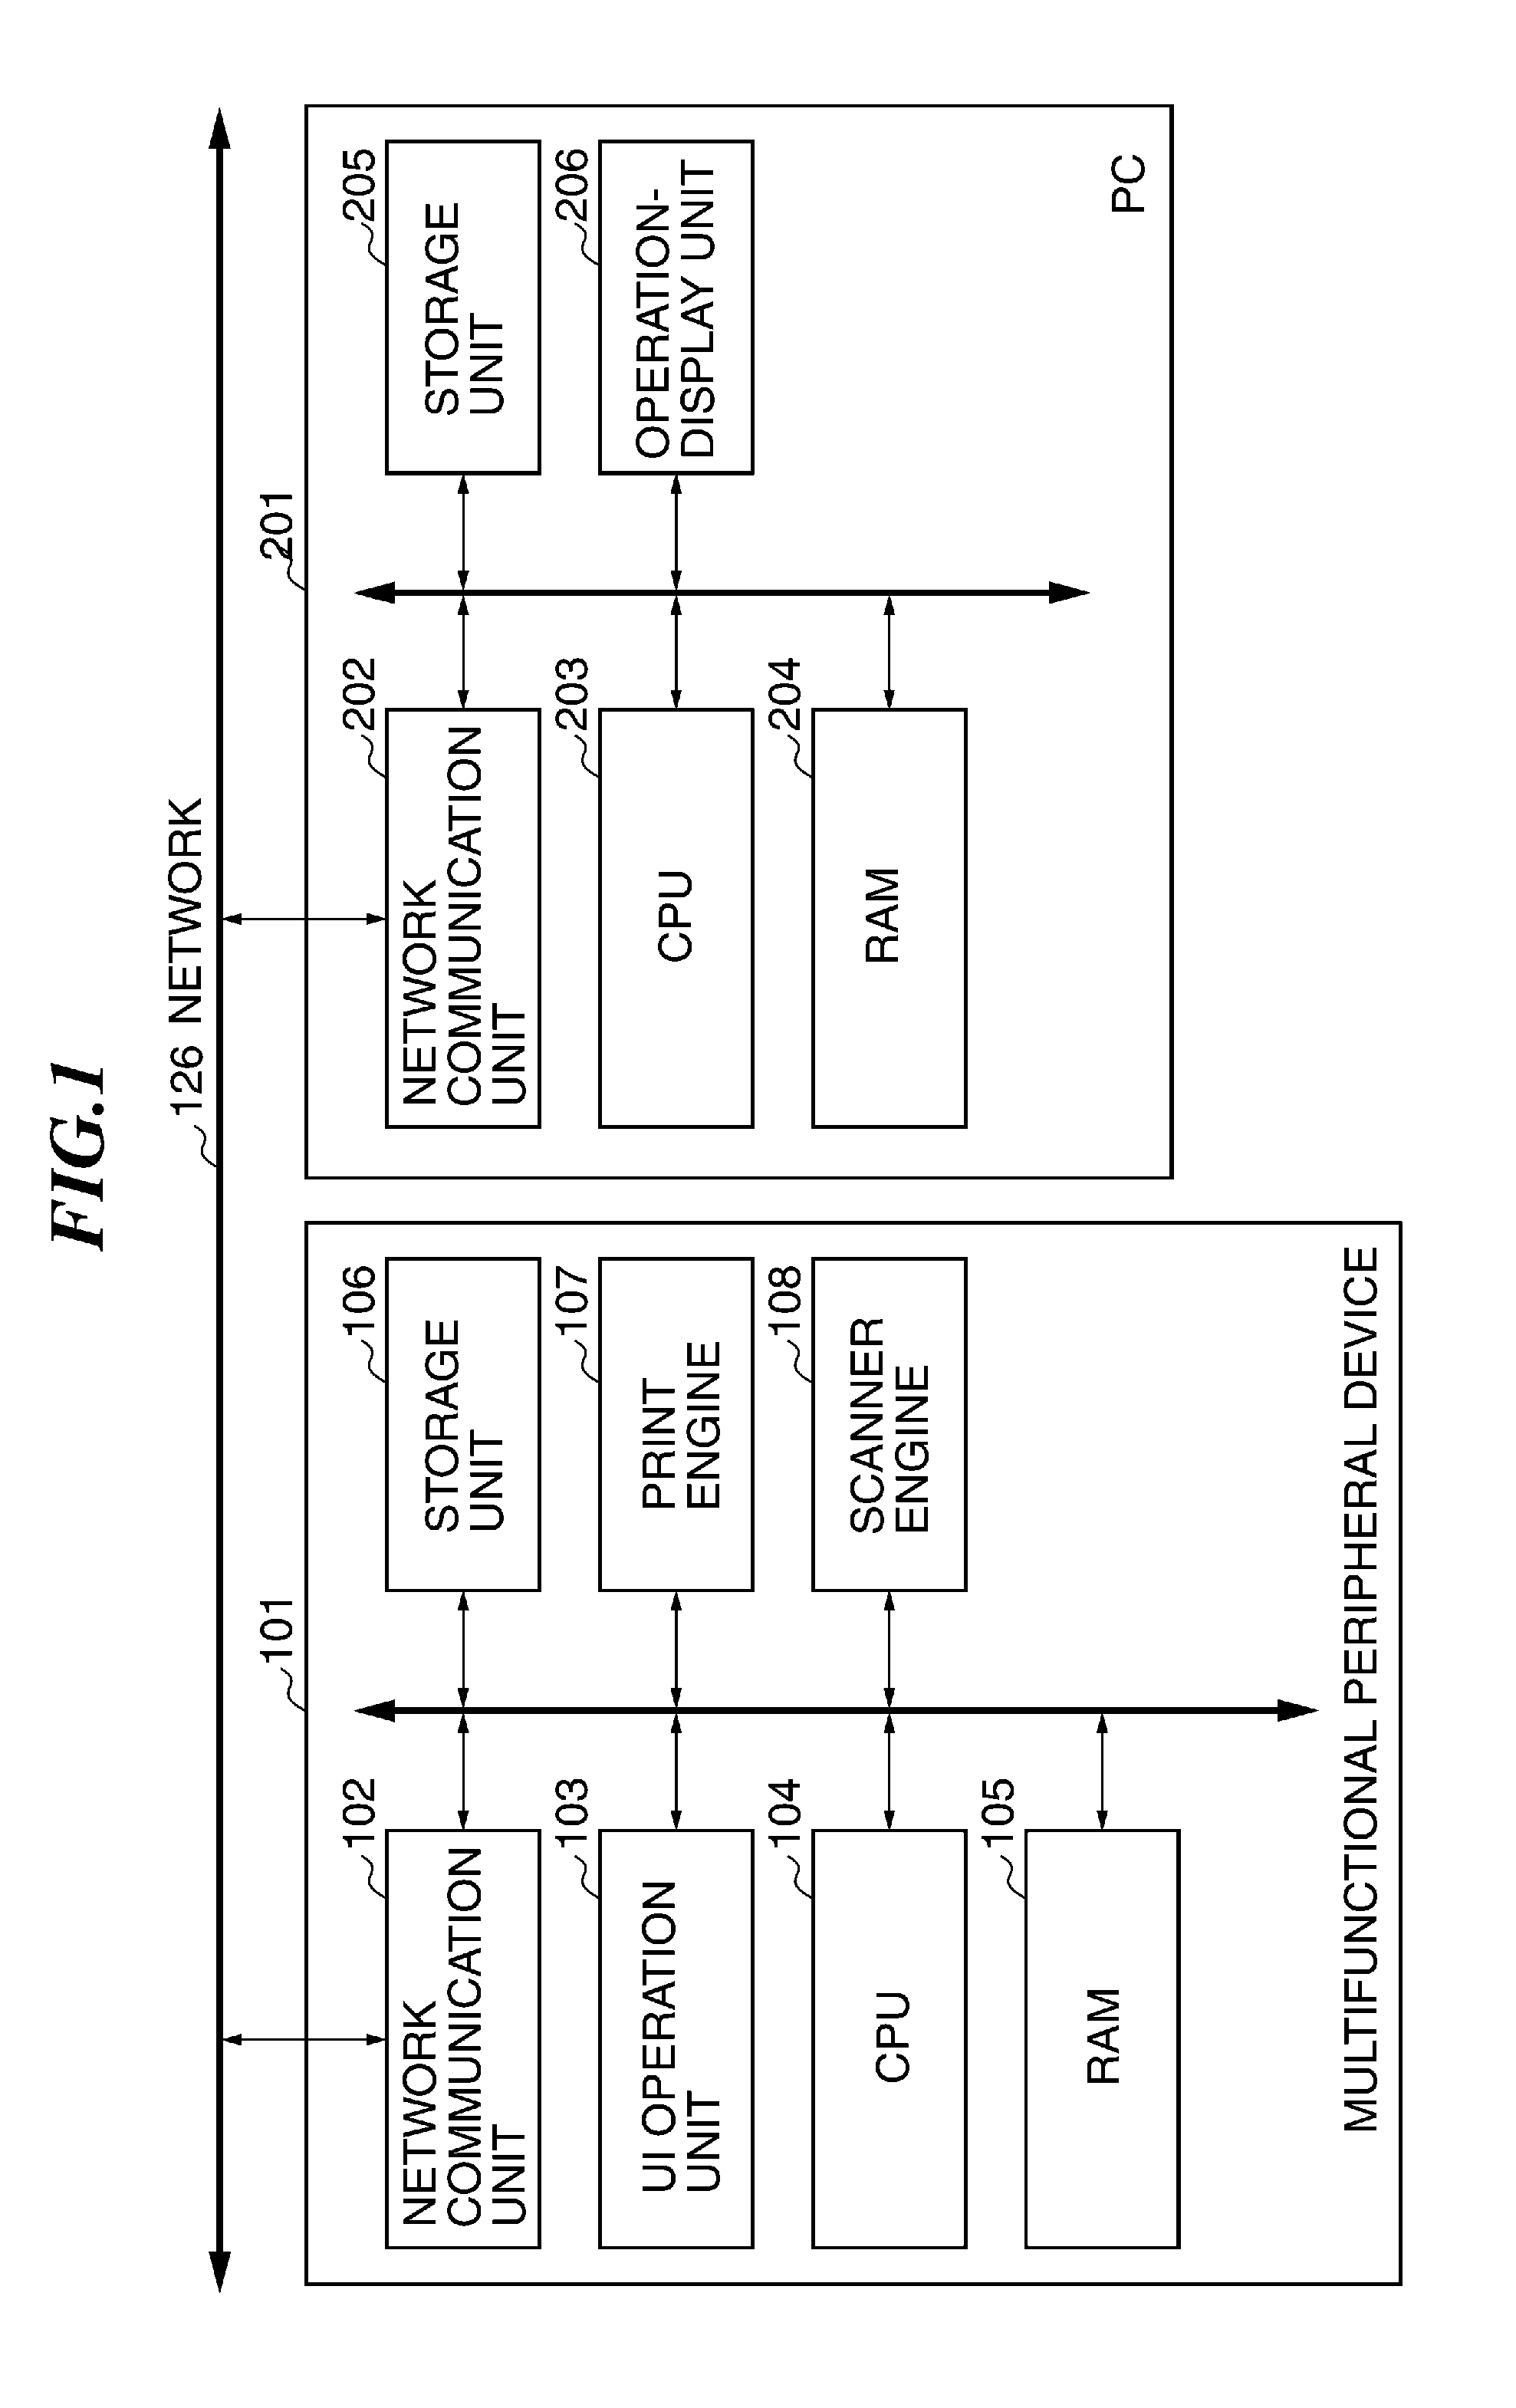 Image forming apparatus, control method therefor, and storage medium storing control program therefor